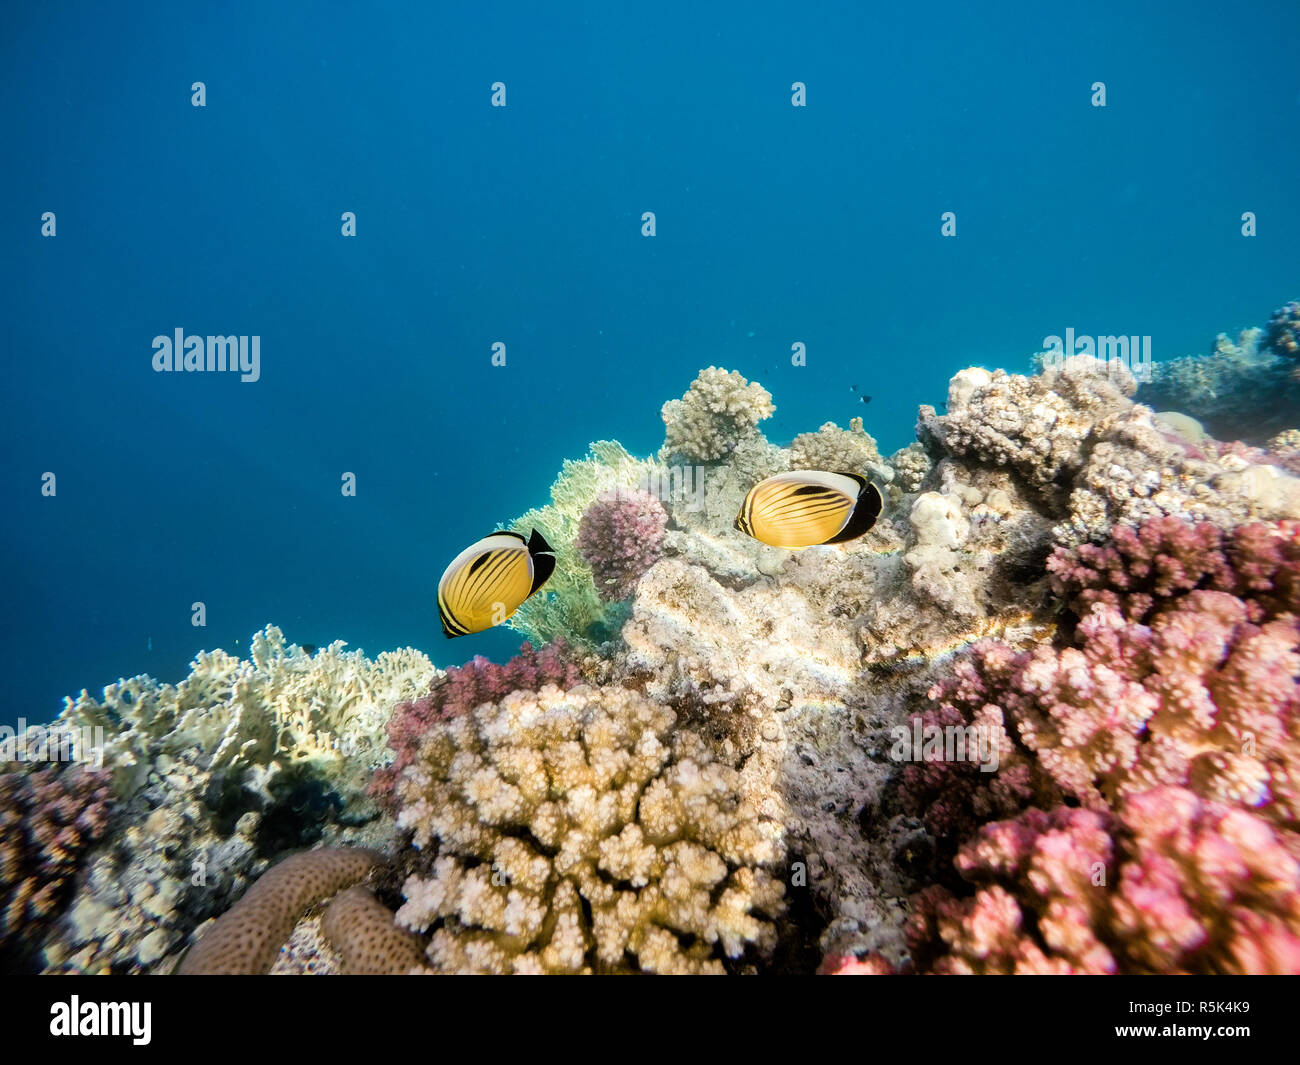 Blacktail butterflyfish on Coral garden in red sea, Marsa Alam, Egypt Stock Photo